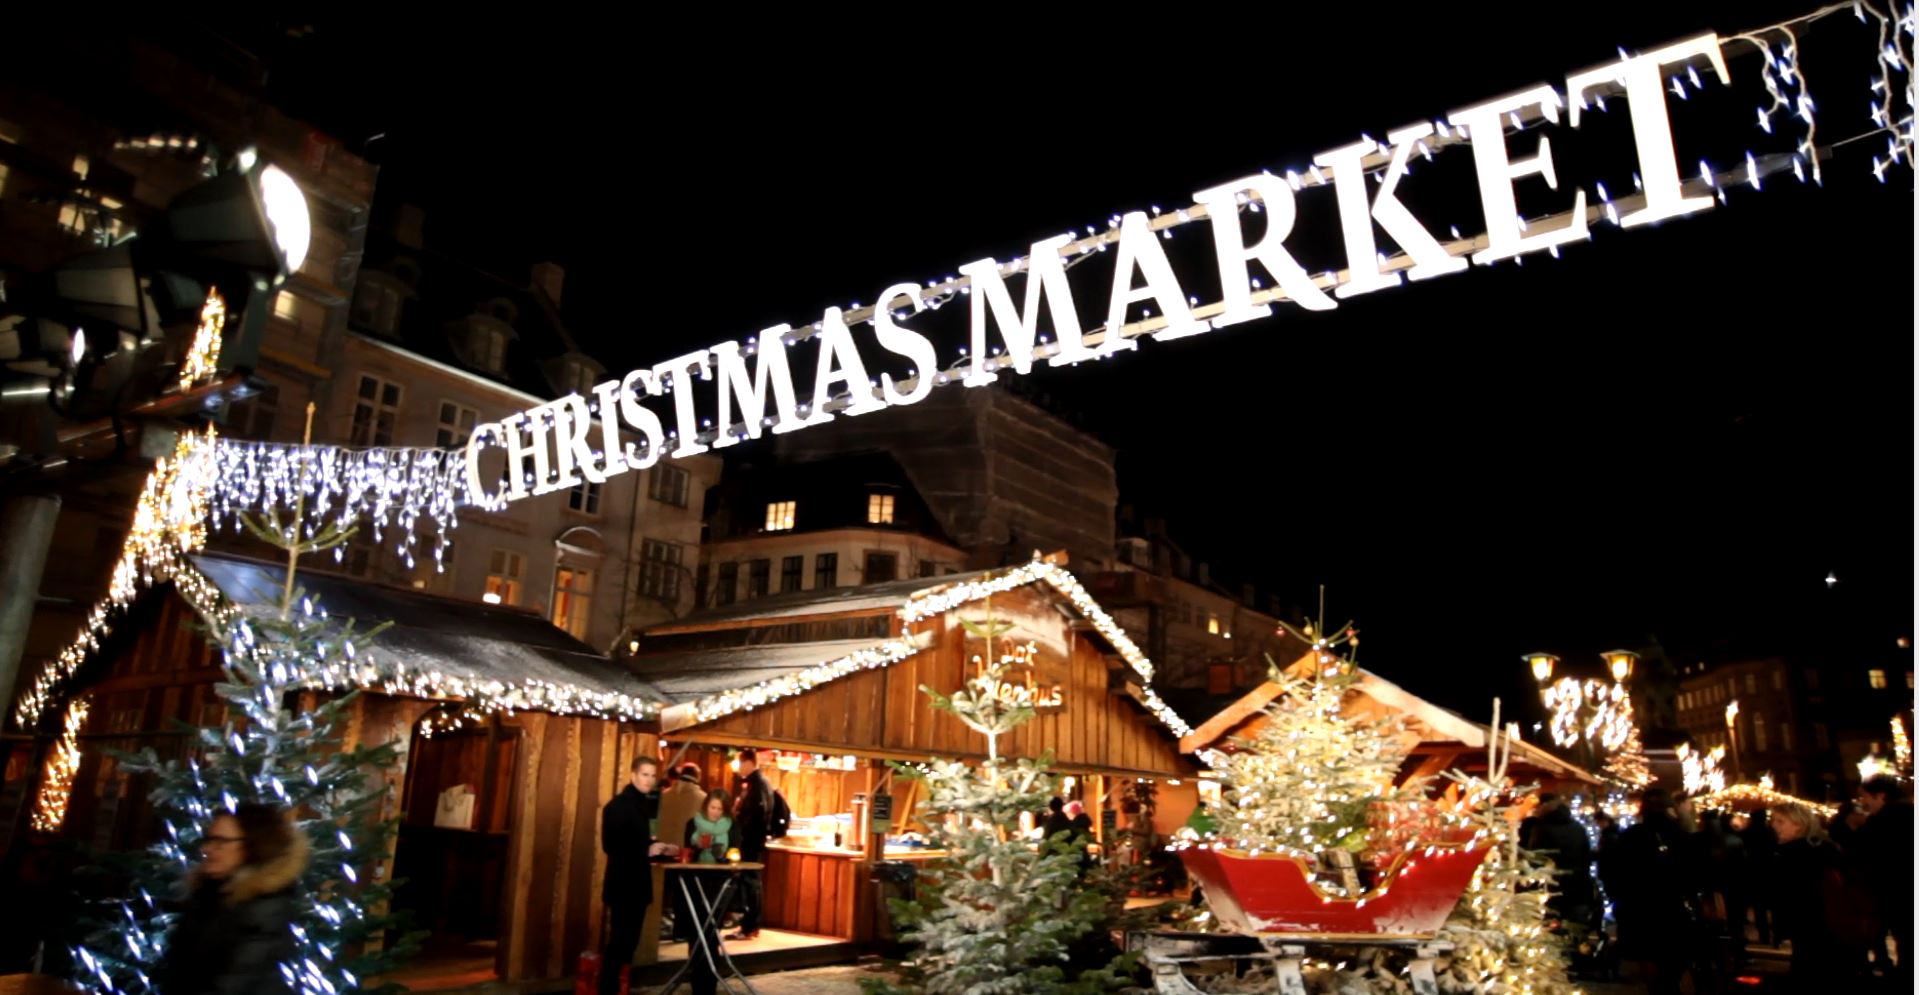 Christmas Eve Market on Saturday, December 24th, 7am12 noon